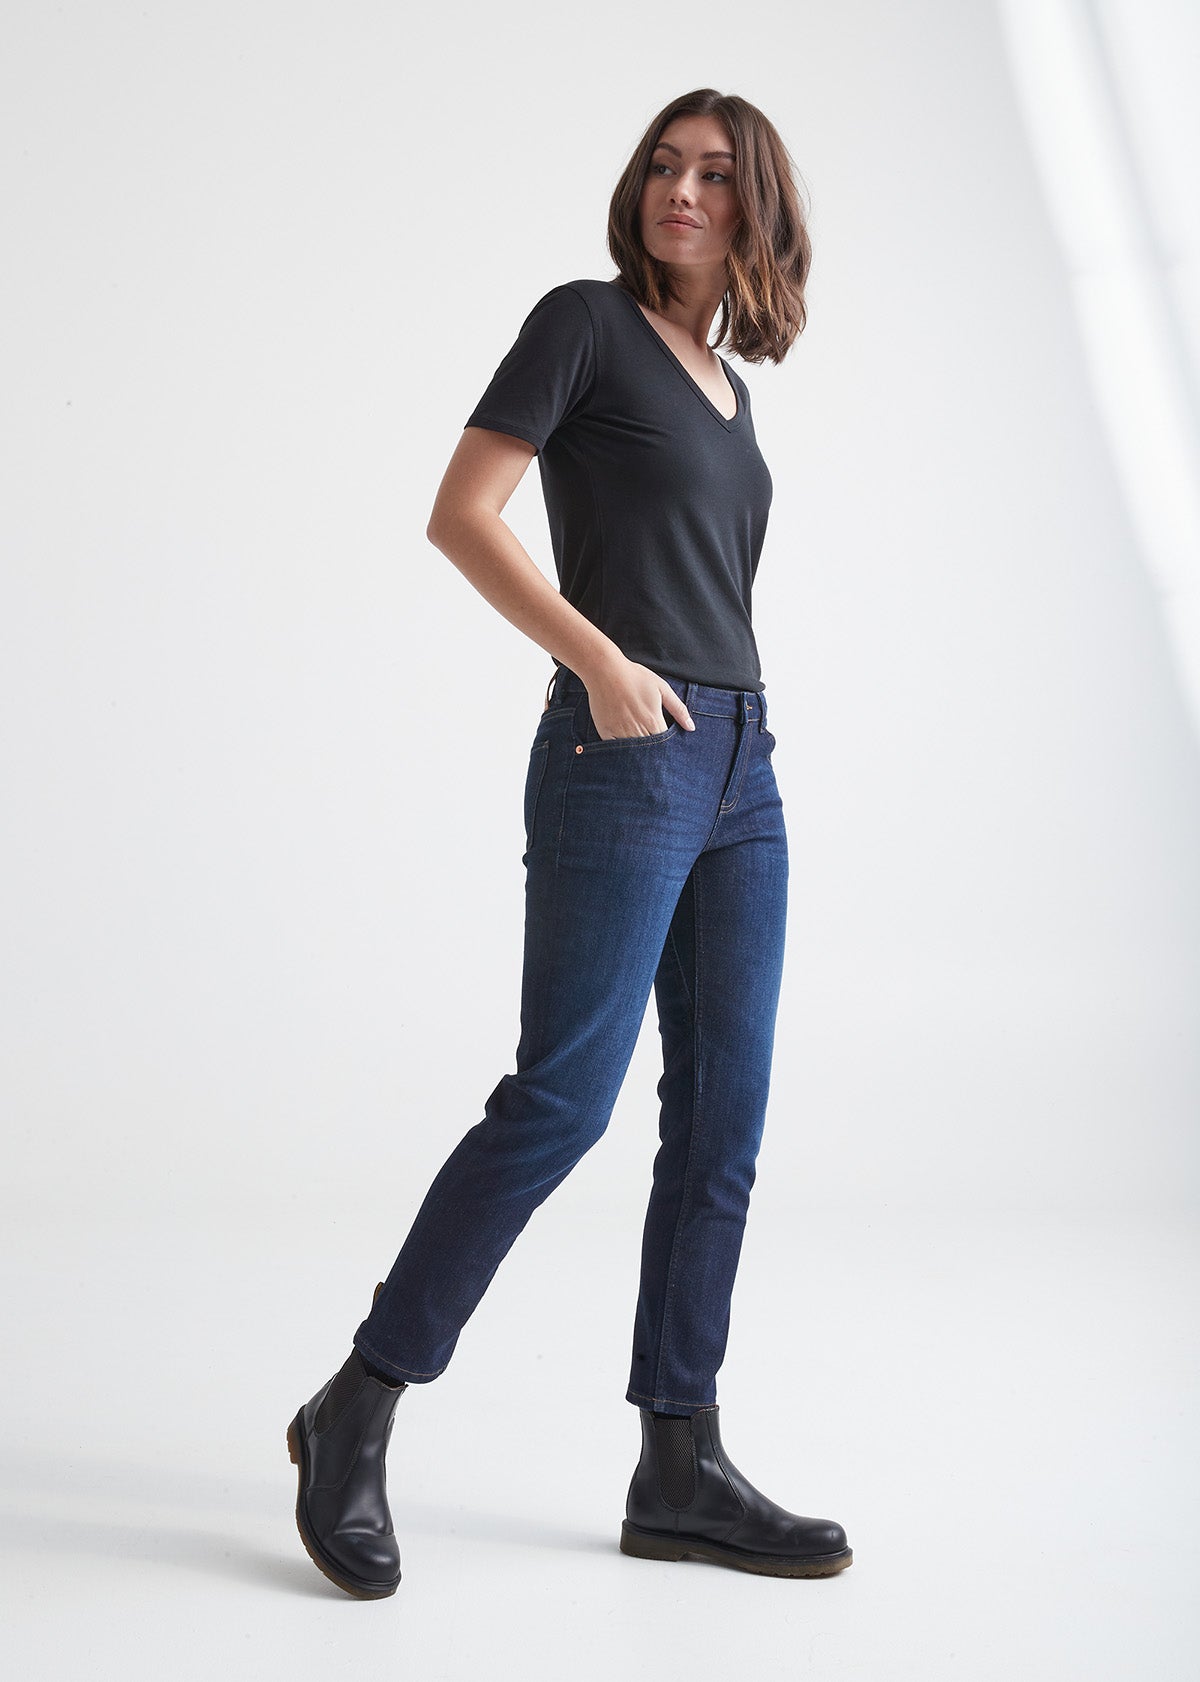 SHADES OF BLUE: Loman's J Brand Jeans (36)